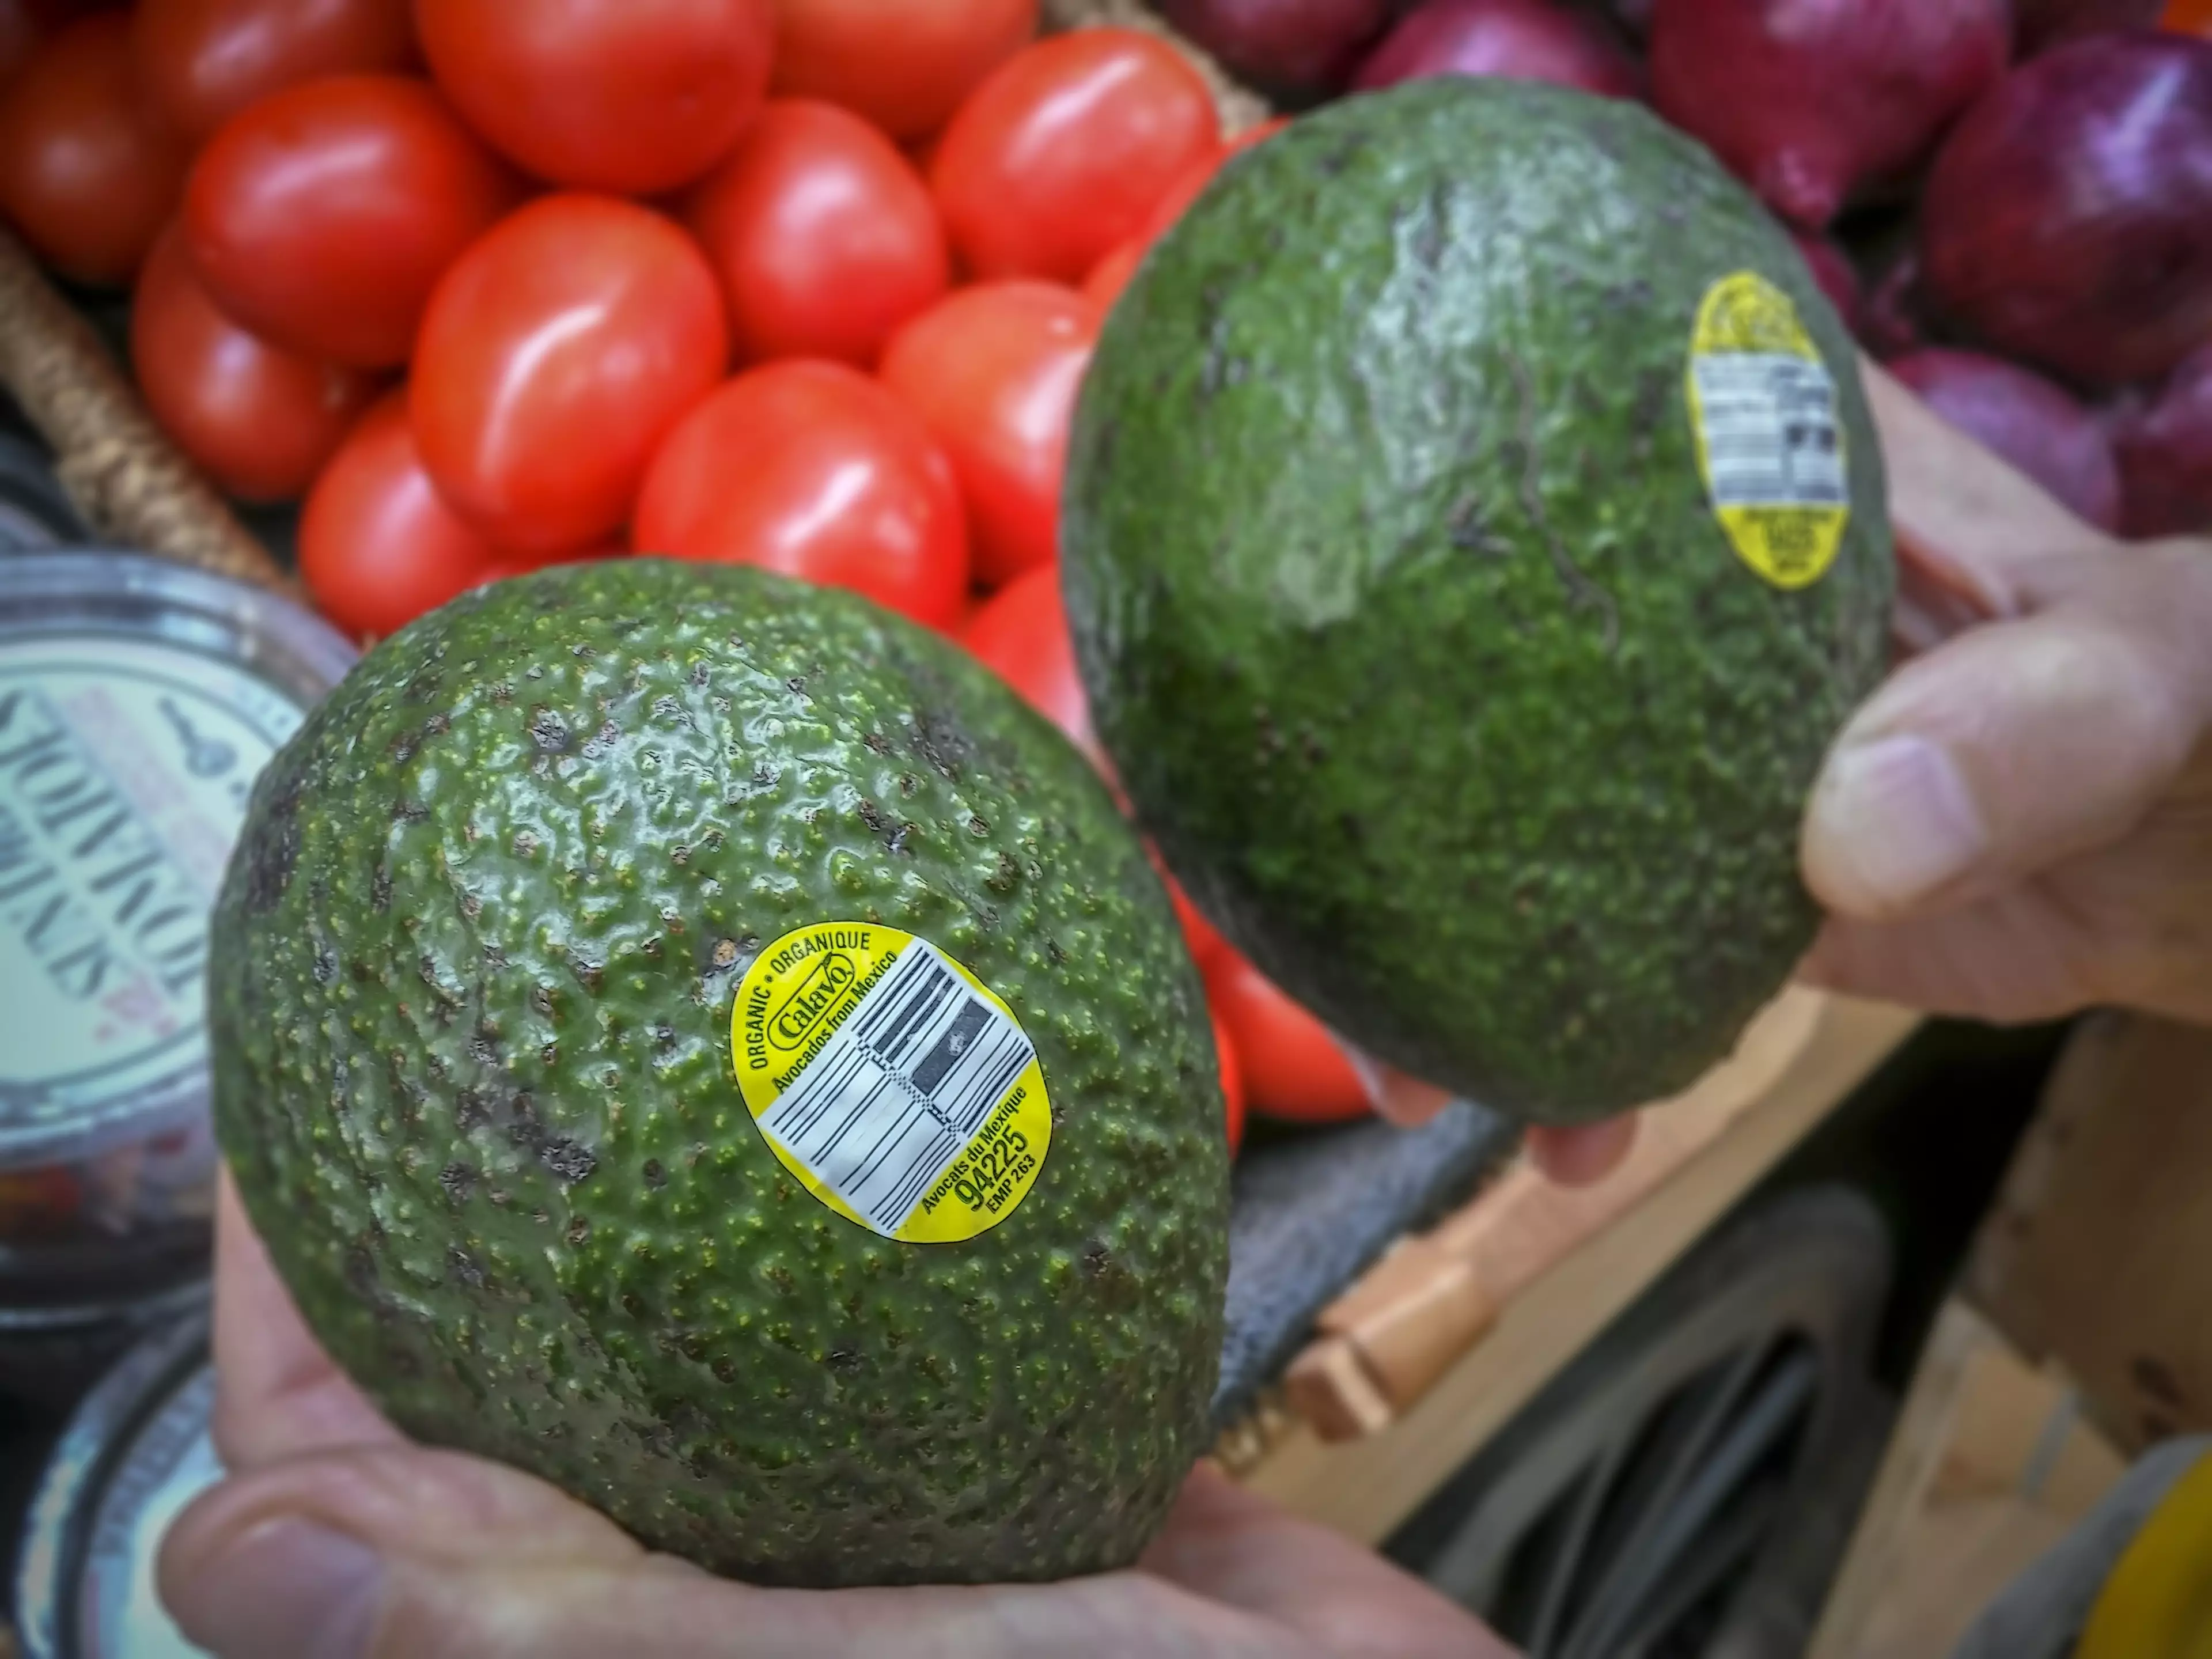 The US could run out of avocados in just three weeks if it closes Mexican border.